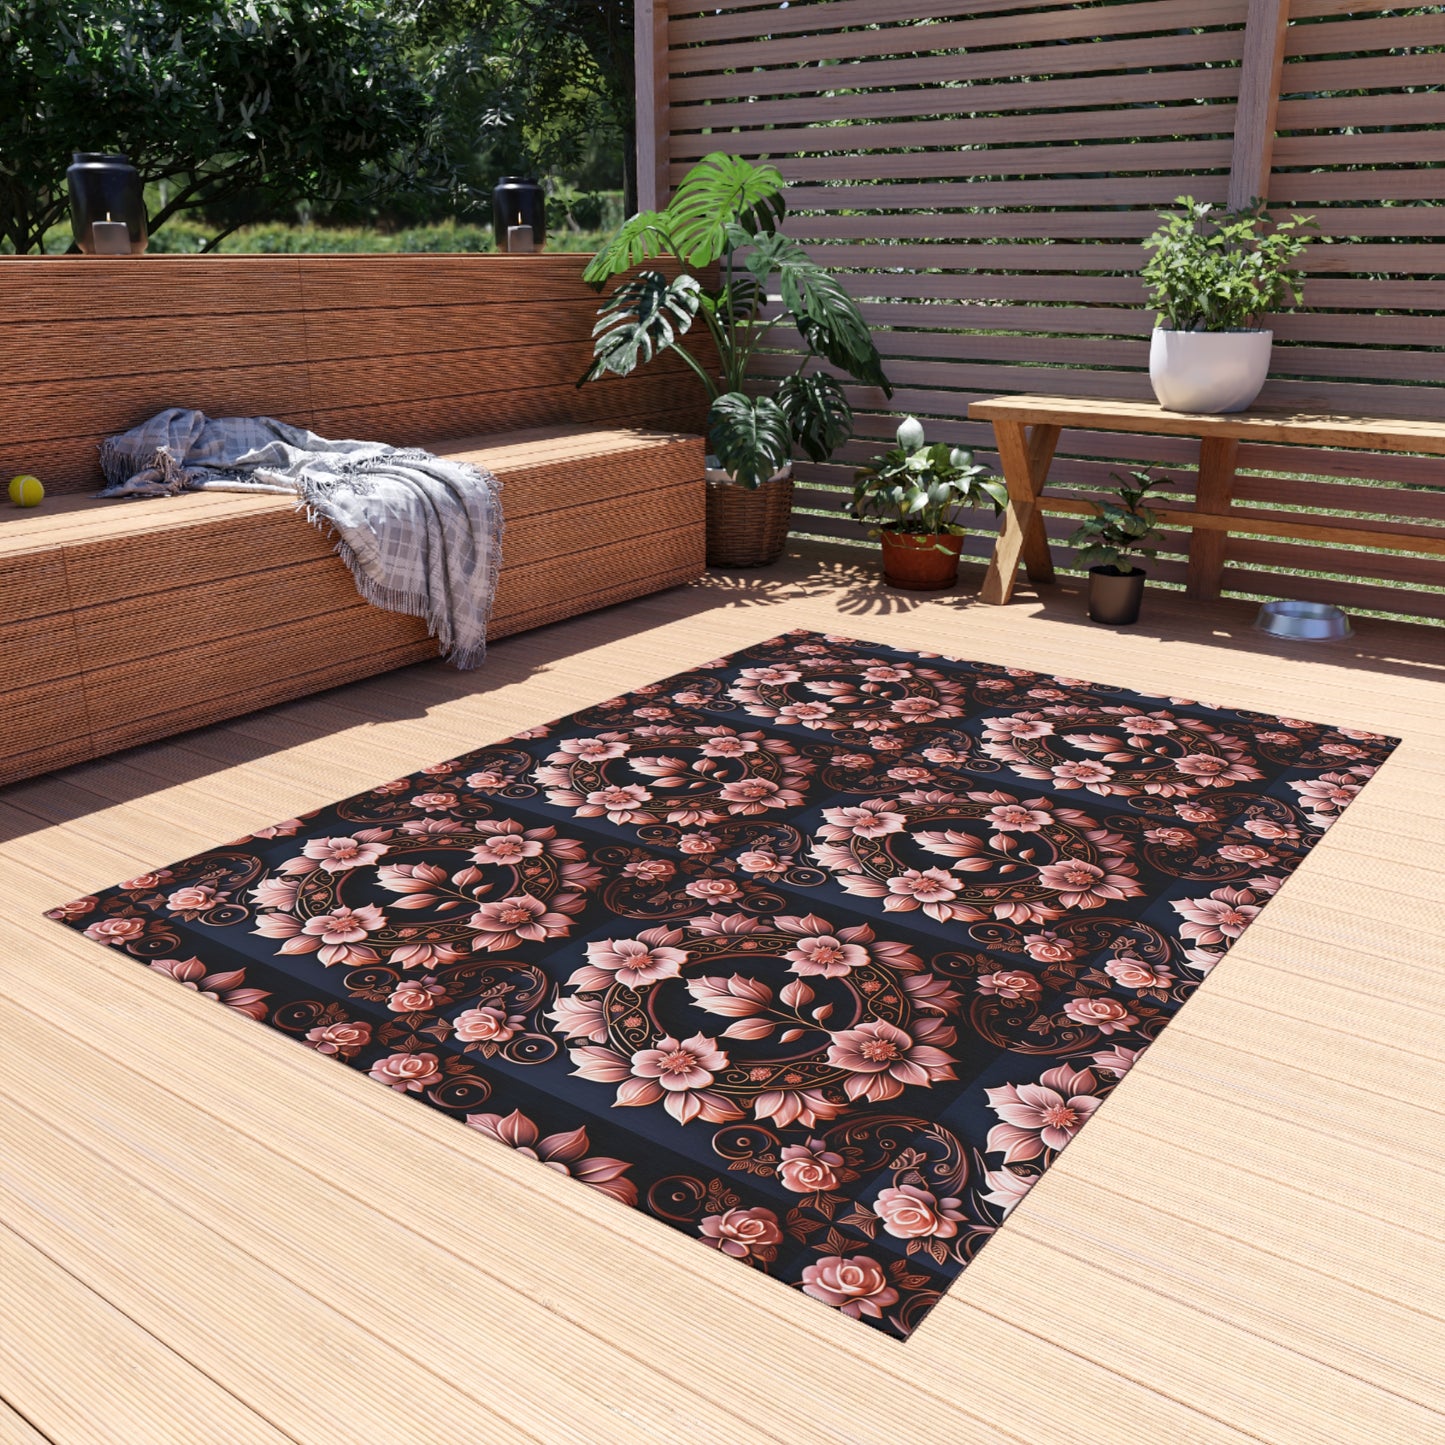 Niccie's Royal Rose Picnic Rug - Outdoor Party Mat for Stylish Picnics